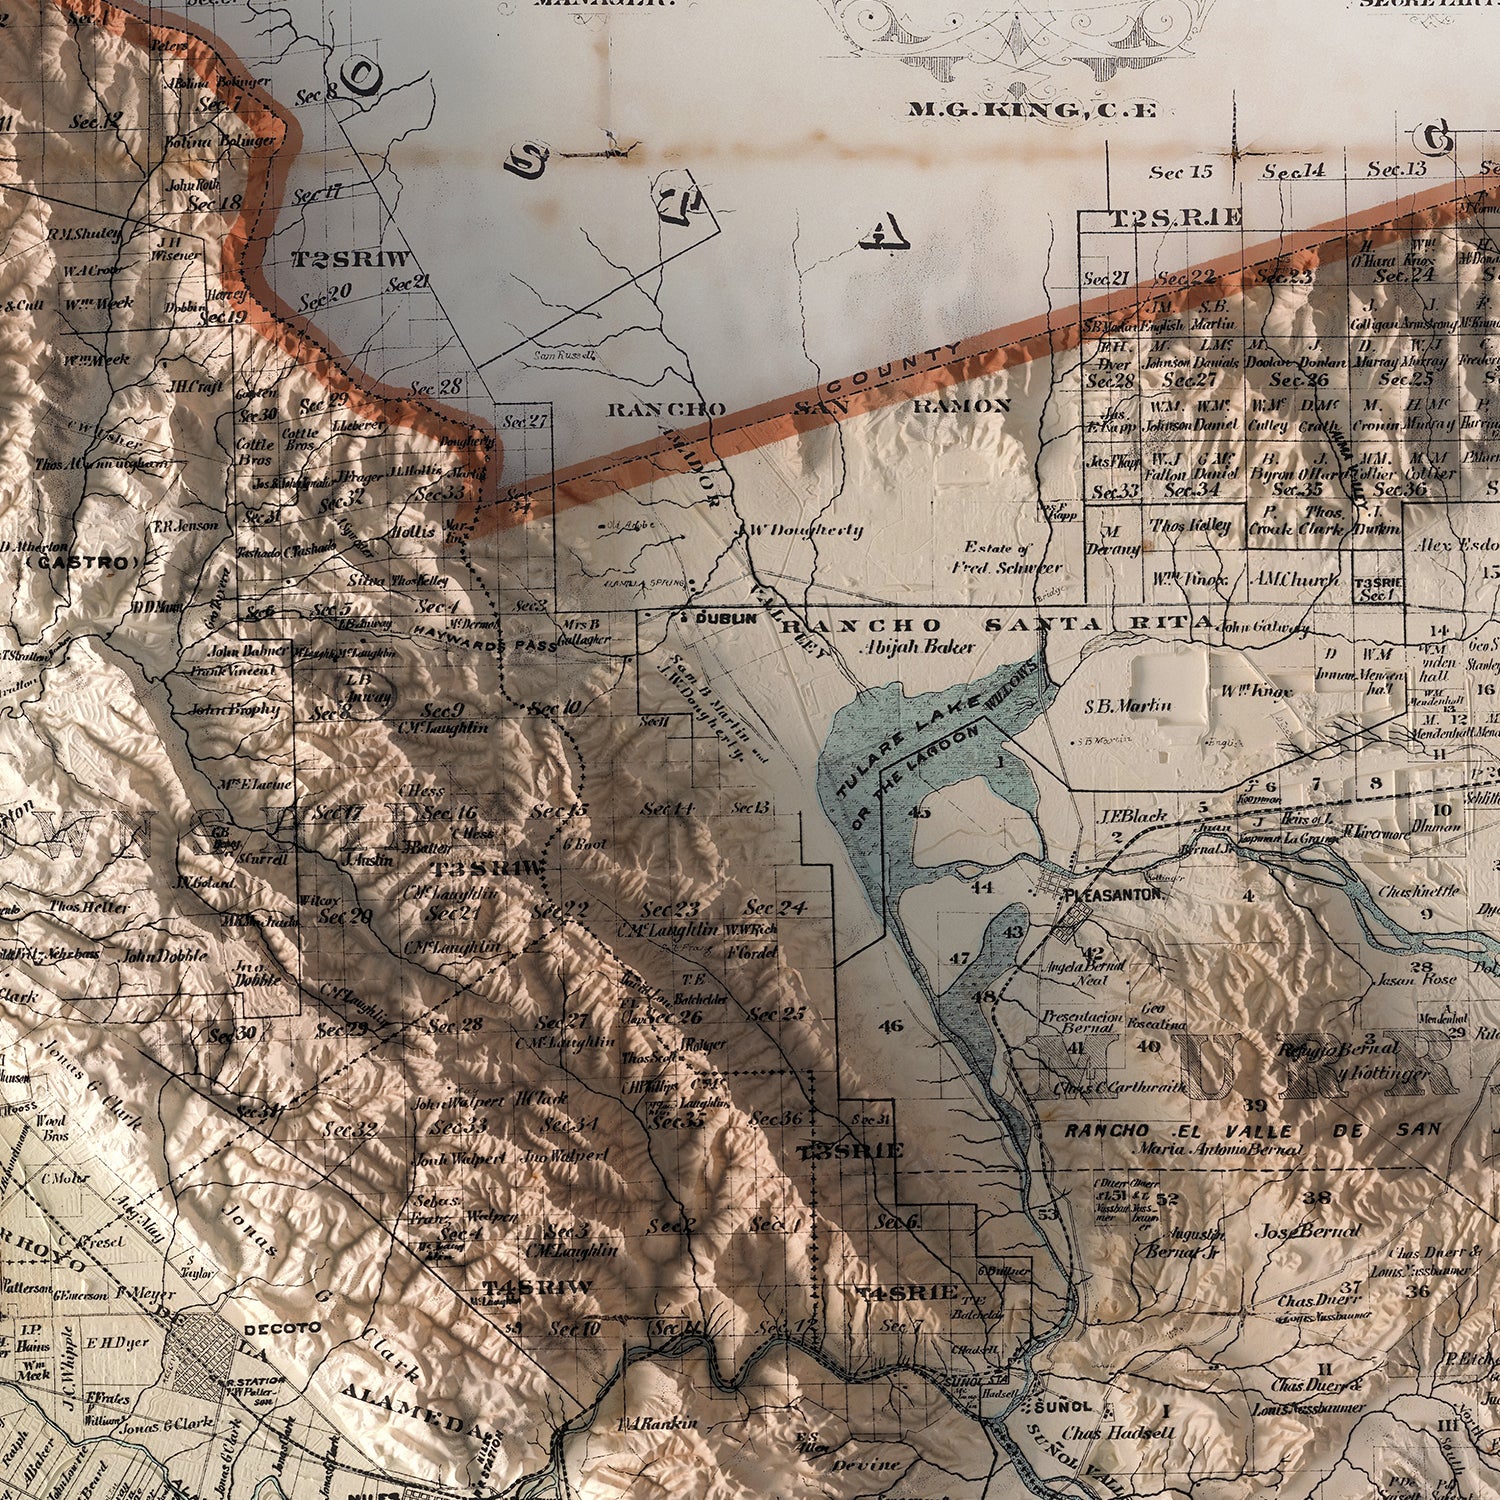 Alameda County, CA - Vintage Shaded Relief Map (1880)